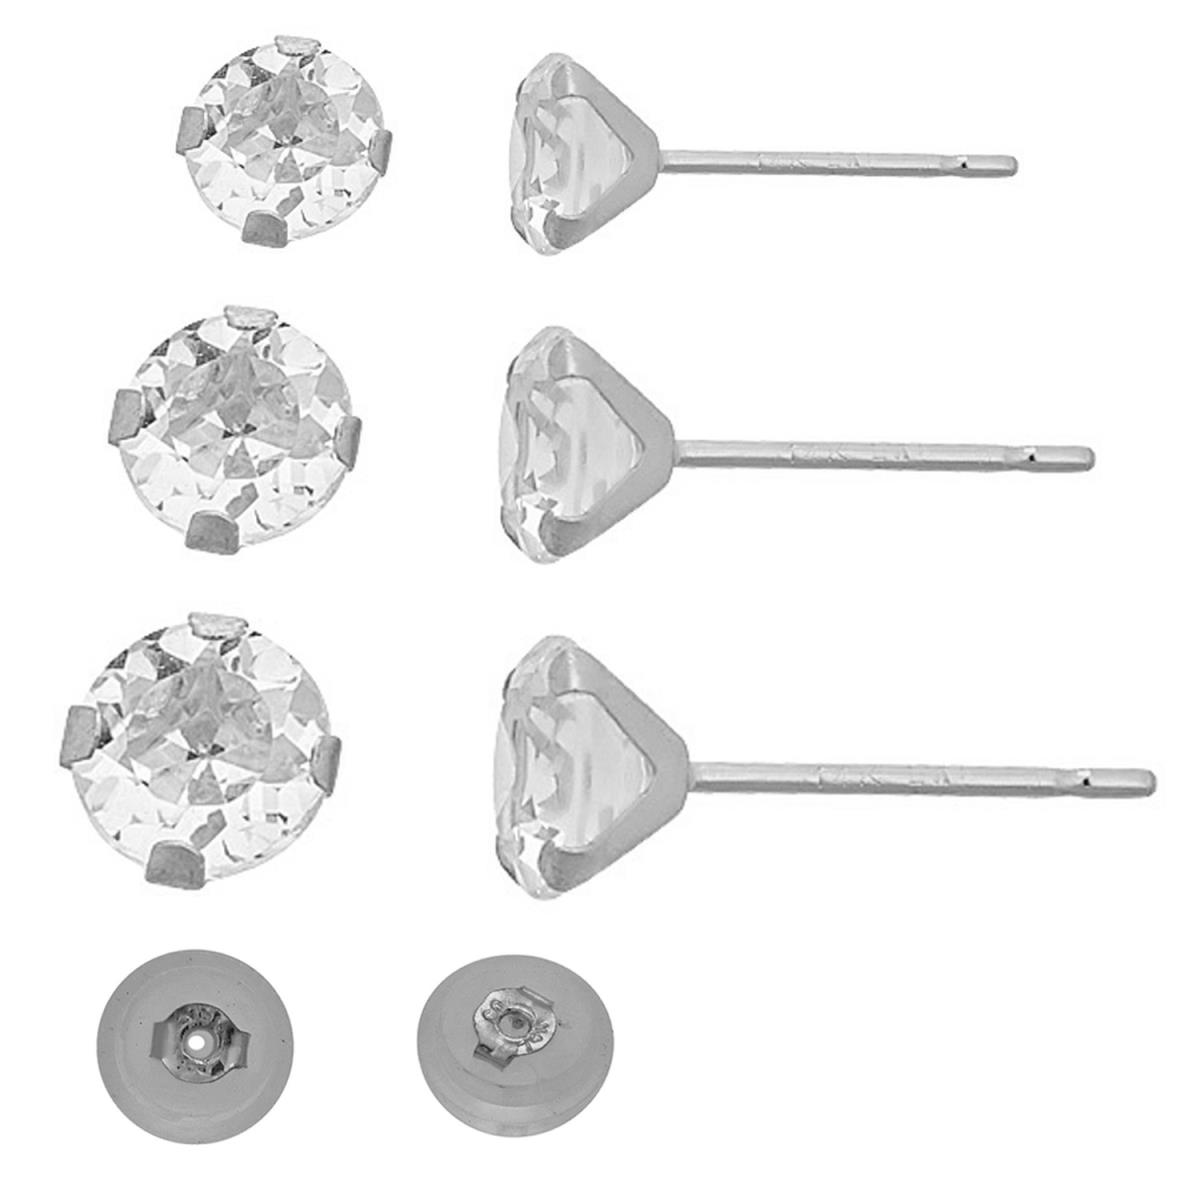 10K White Gold 3,4,5 mm AAA Round Martini Solitaire Stud Set